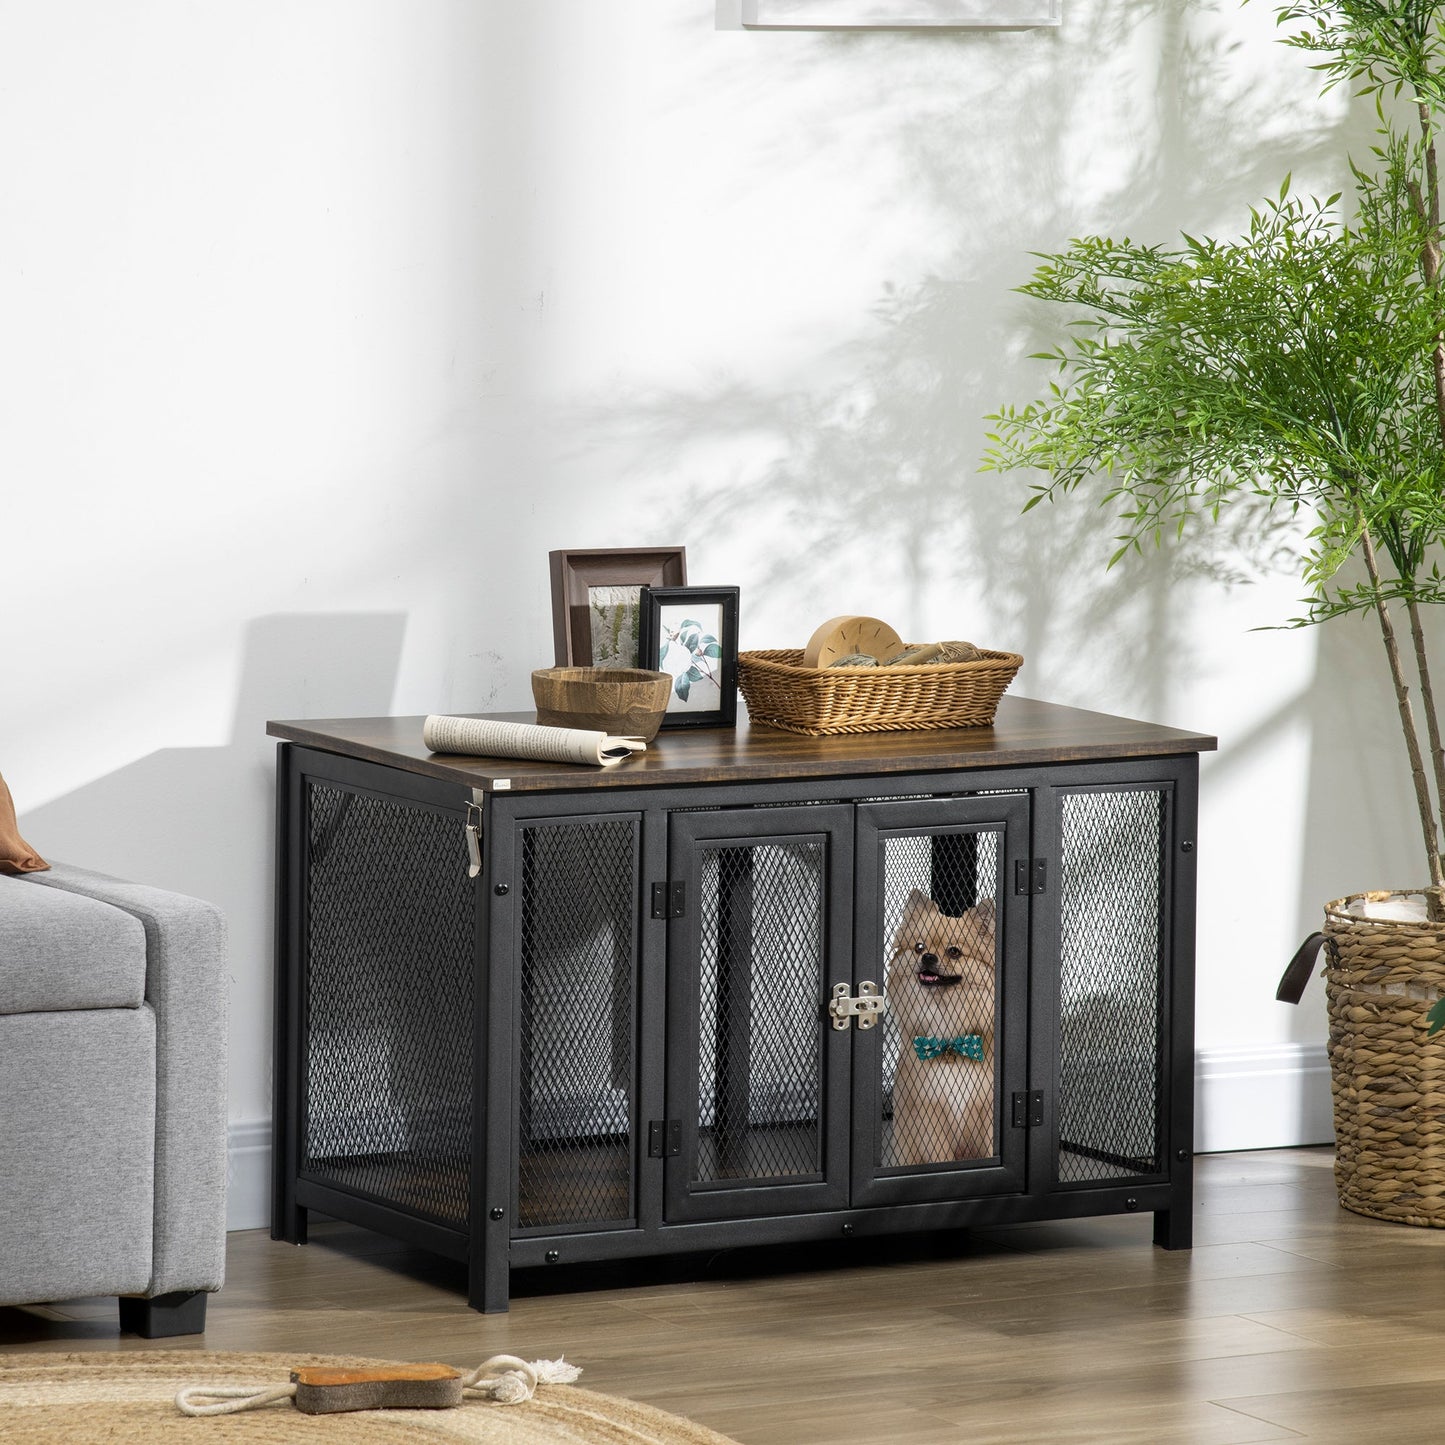 Pet Supplies-Heavy-Duty Large Dog Crate Furniture with Spacious Interior, Big Dog Crate End Table, Puppy Crate for Medium Dogs, Pet Kennel, Brown/Black - Outdoor Style Company